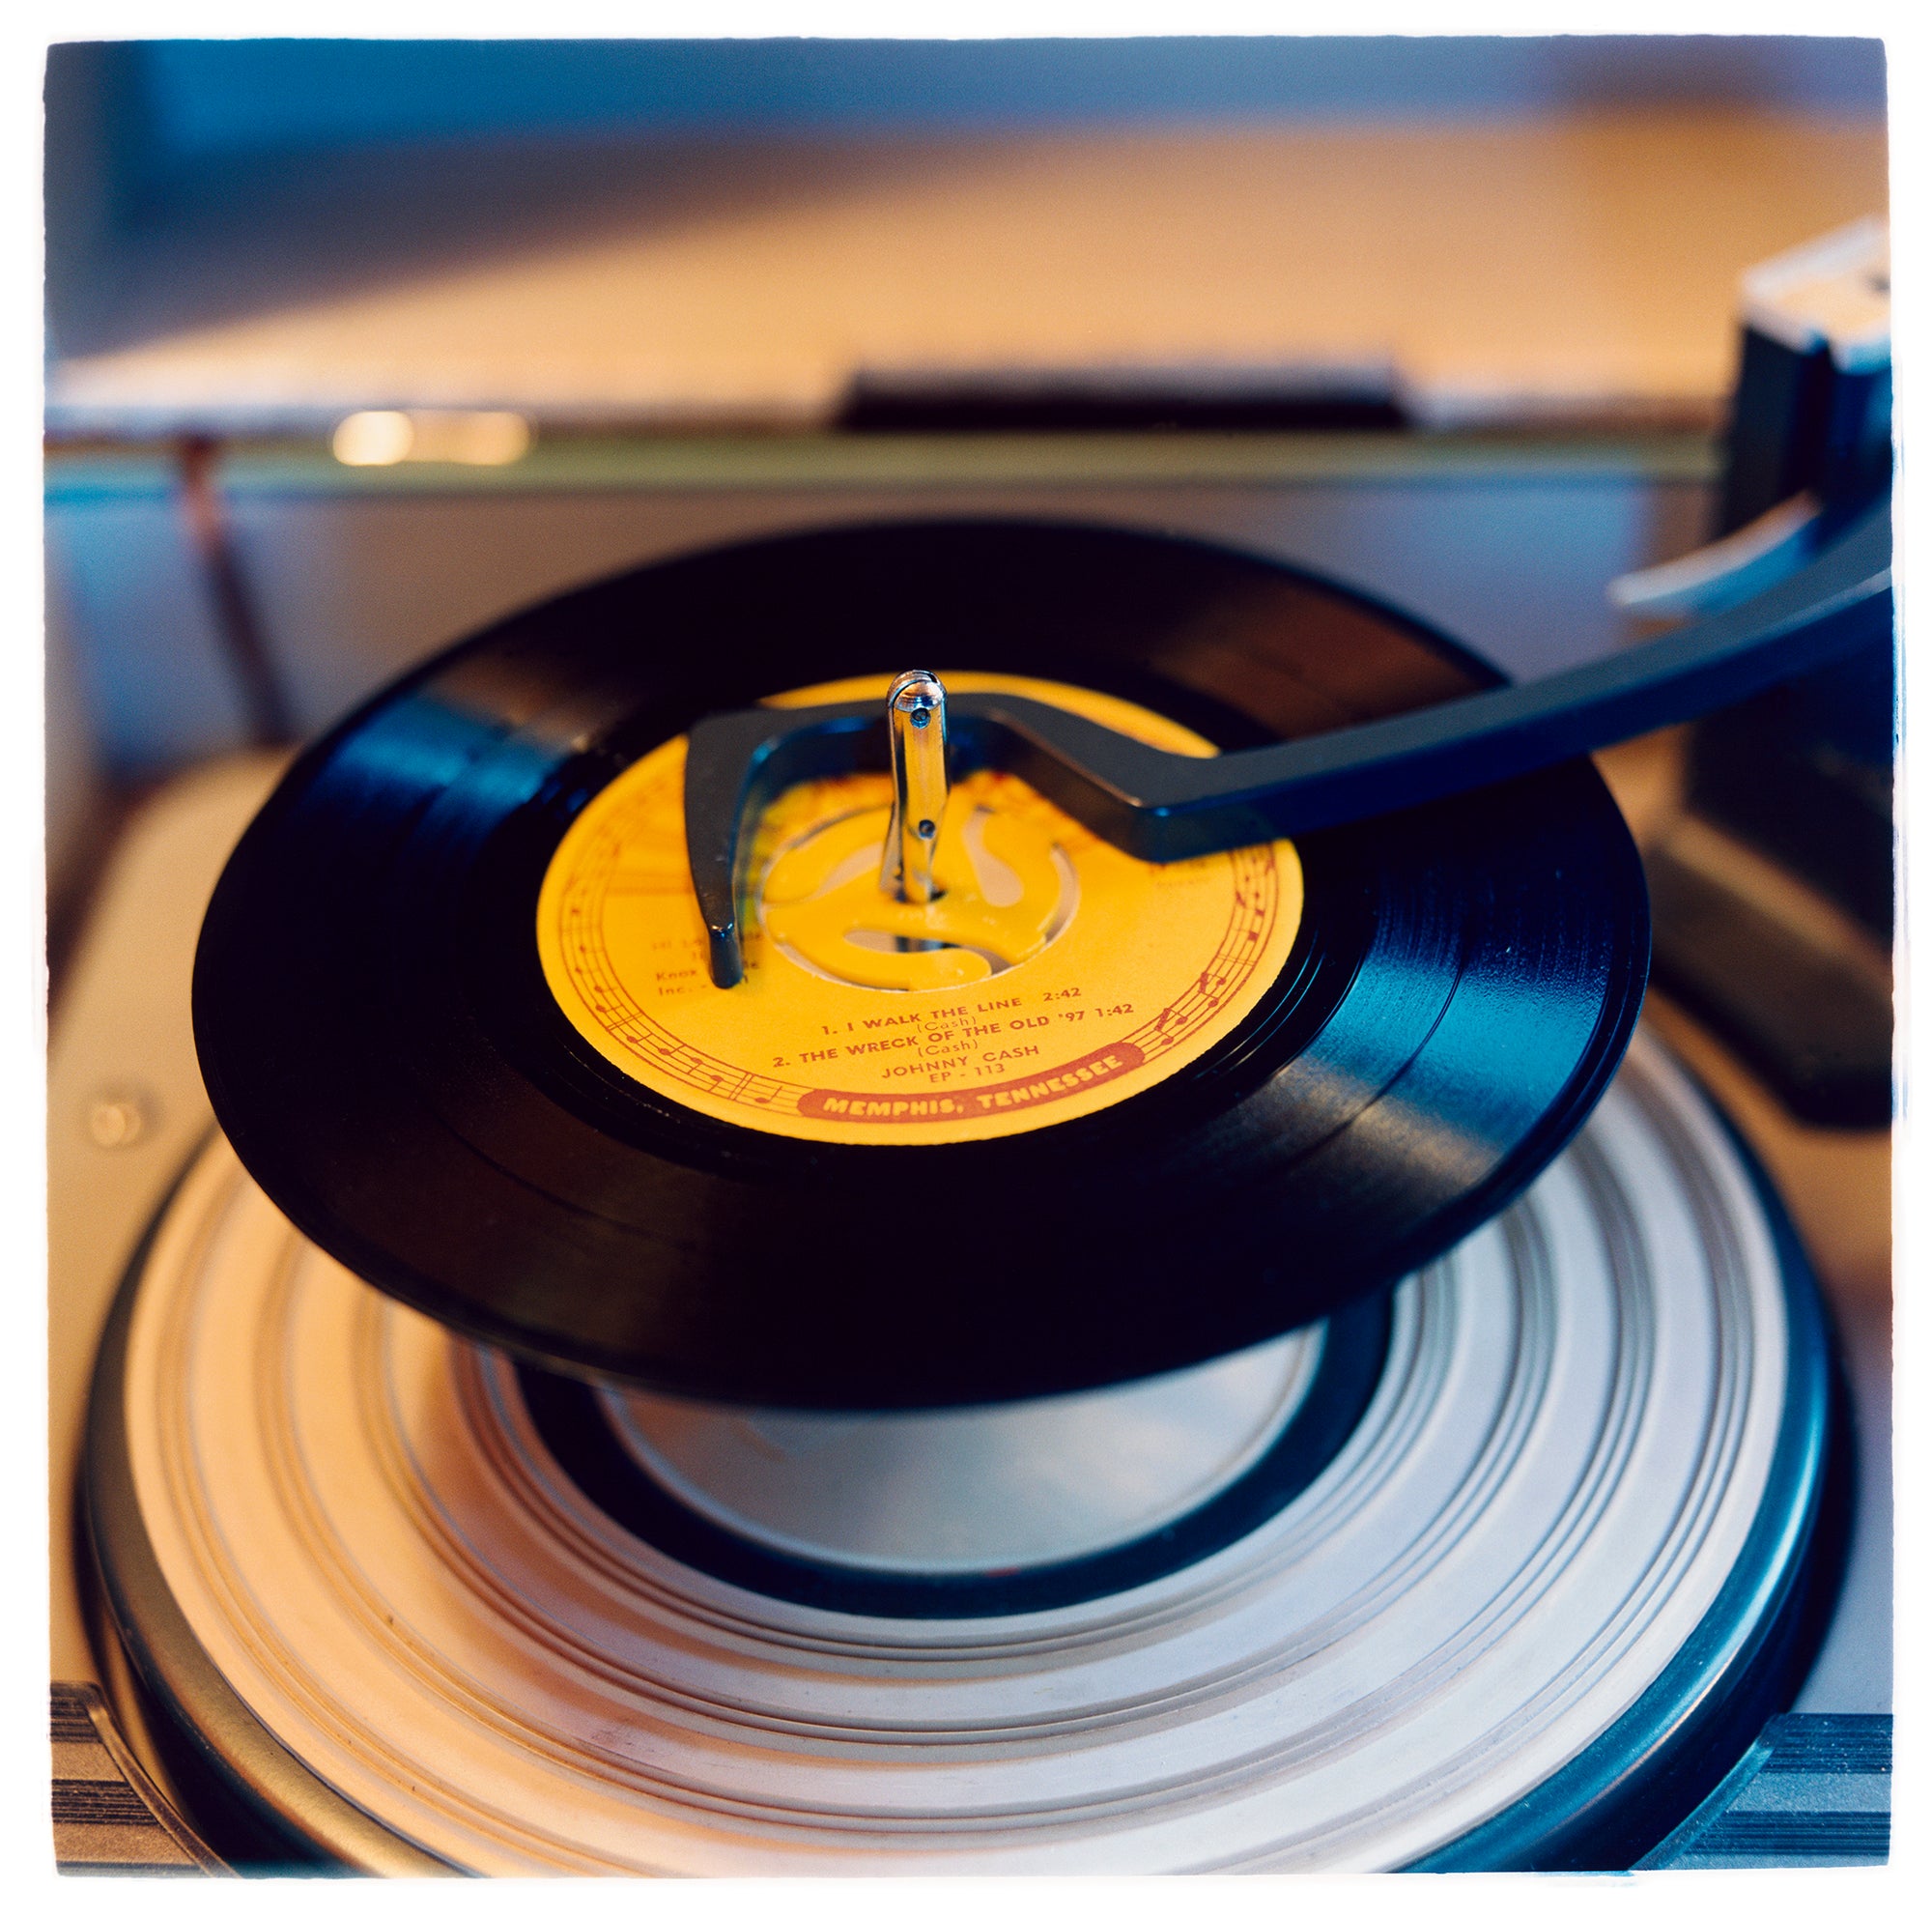 Photograph by Richard Heeps.  Johnny Cash record "I Walk The Line" with its yellow label is loaded up on a record player.